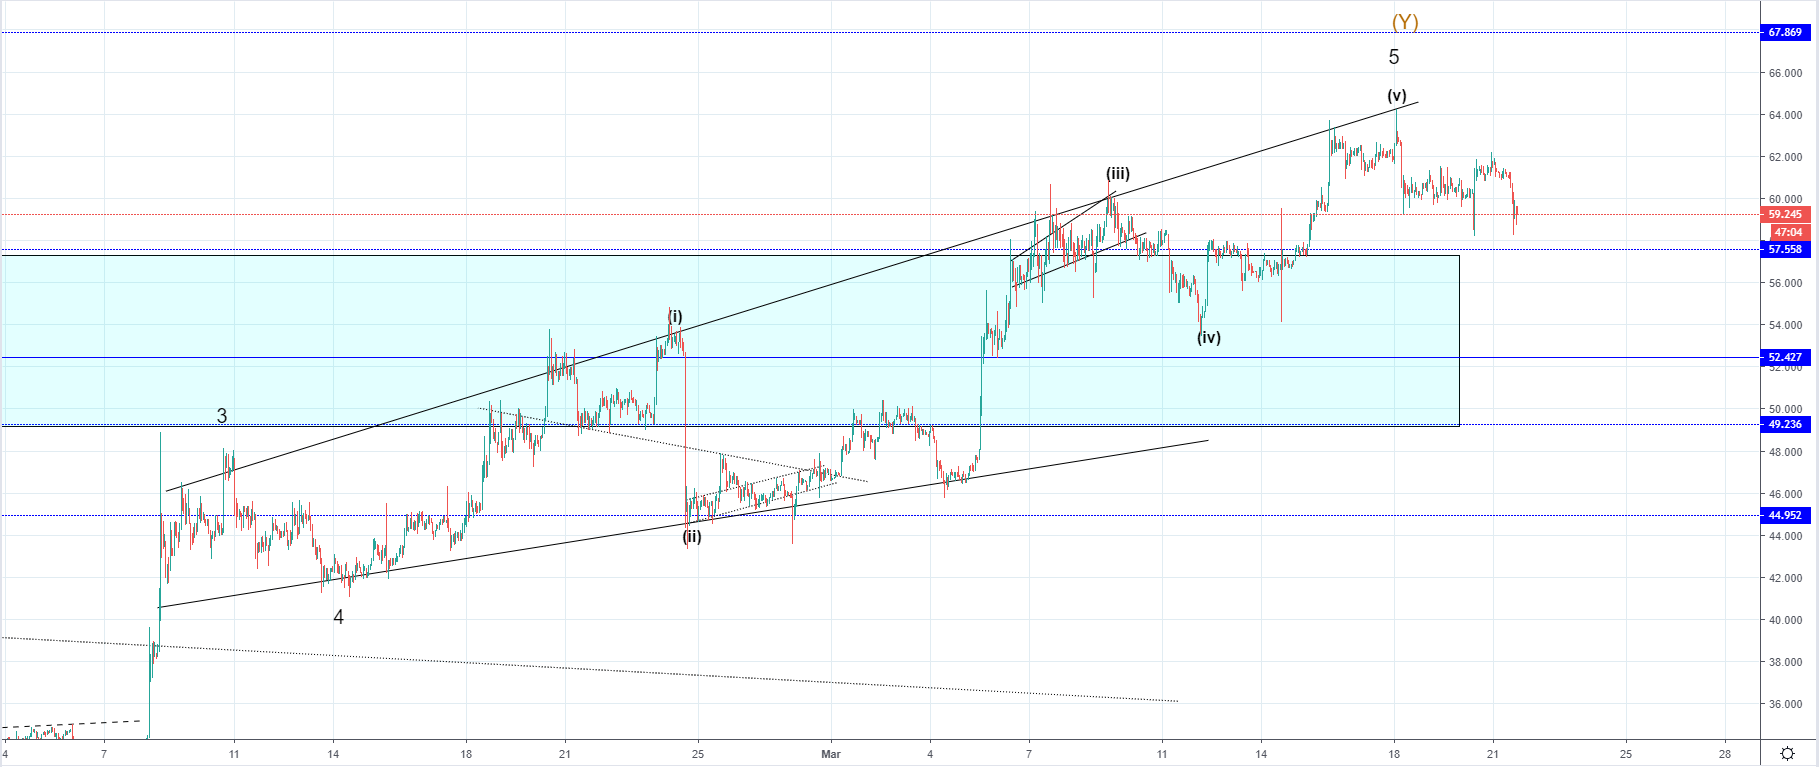 LTC/USD and EOS/USD are showing weakness with downside expected